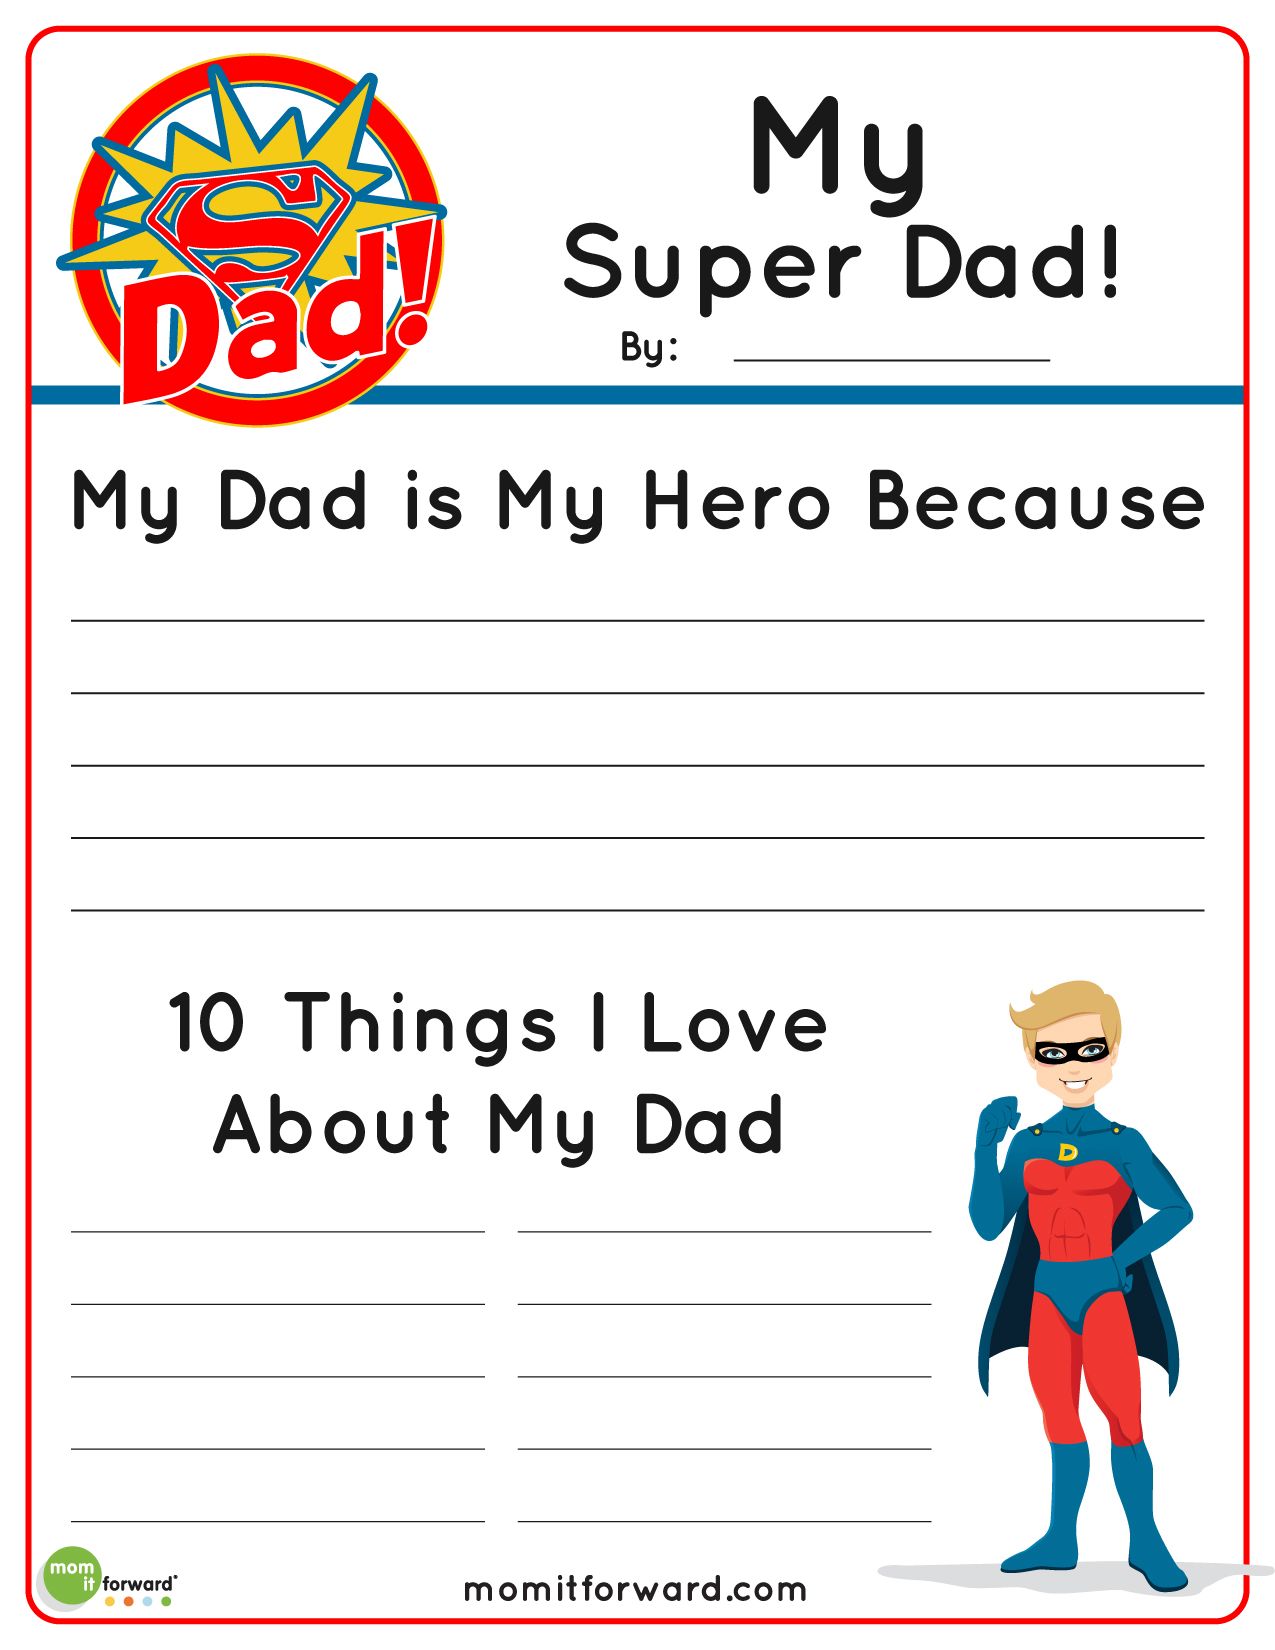 free-printable-fathers-day-invitations-printable-party-kits